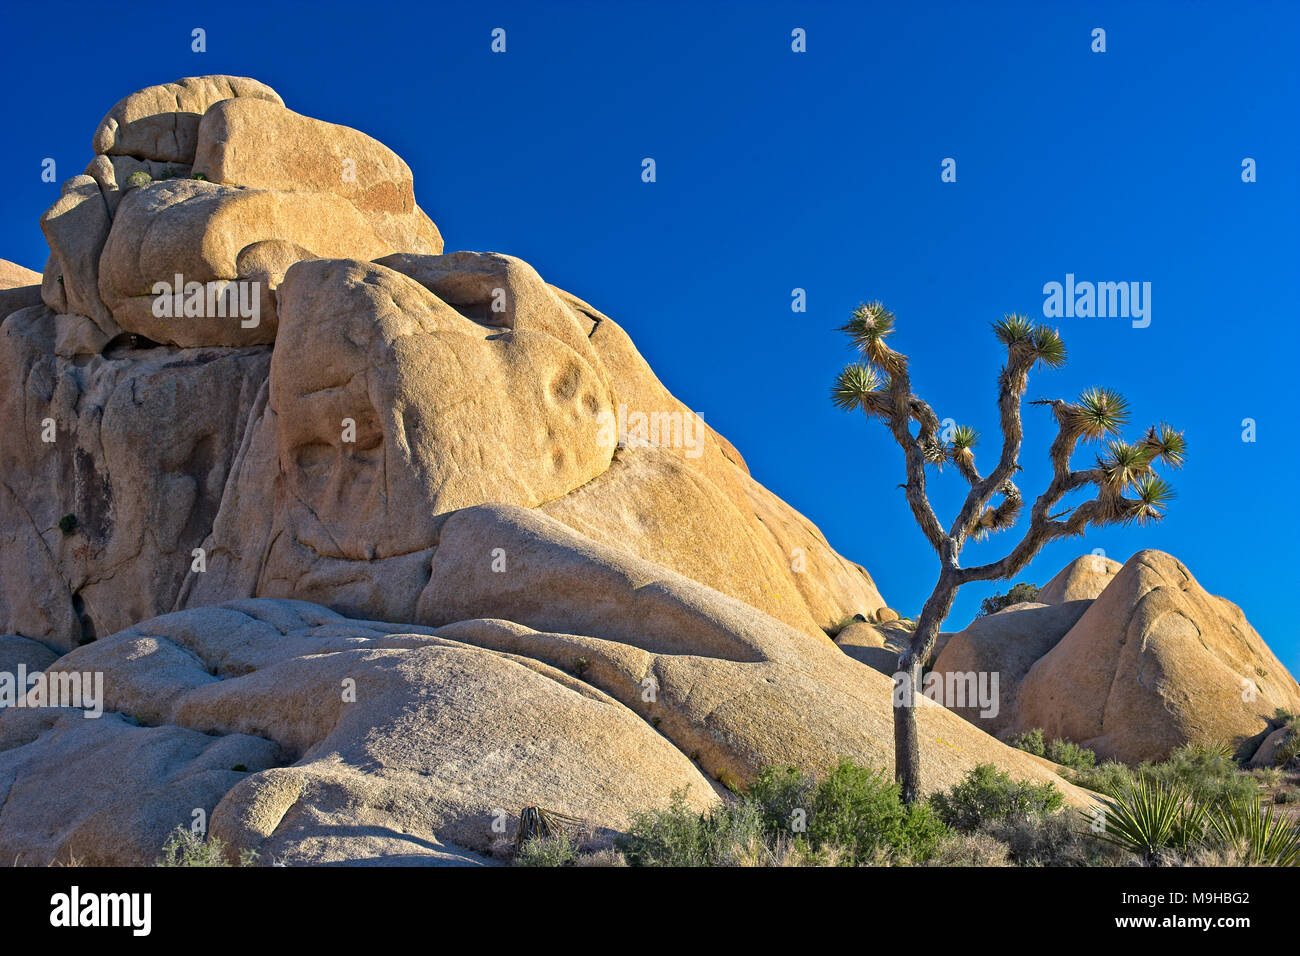 Single Joshua tree is dwarfed by the monzogranite rock formations in Joshua tree national Park in Southern California’s Mojave Desert Stock Photo